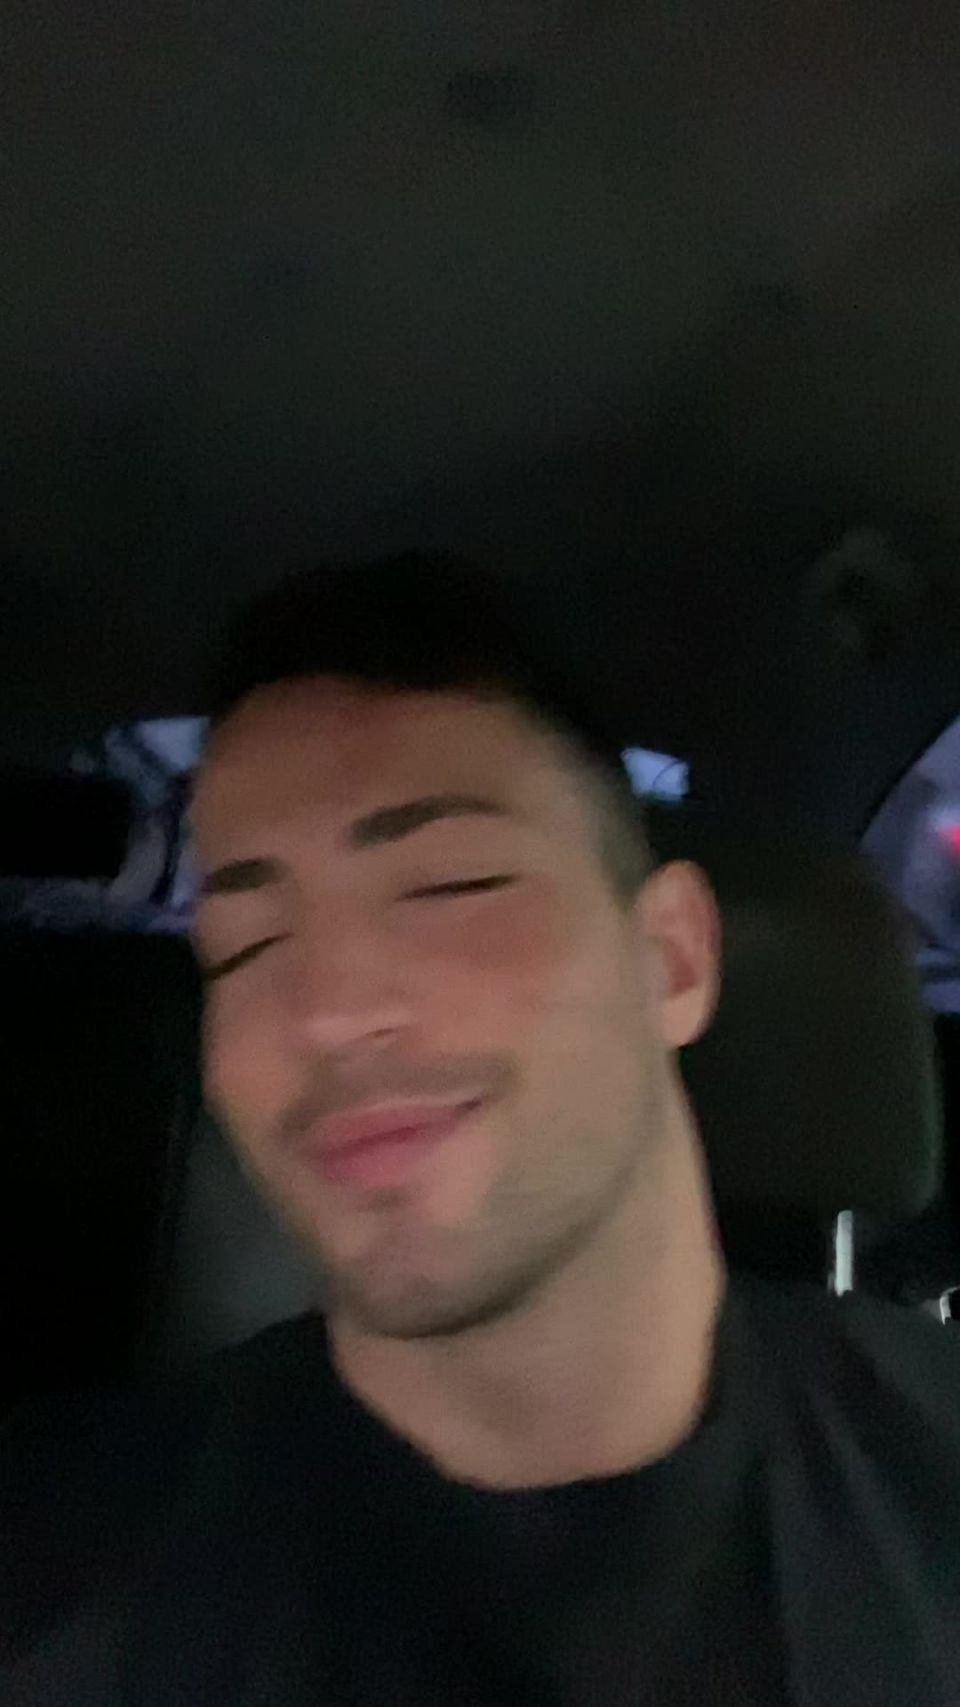 [Onlyfans] maximo garcia-01-01-2020-17707551-In the car